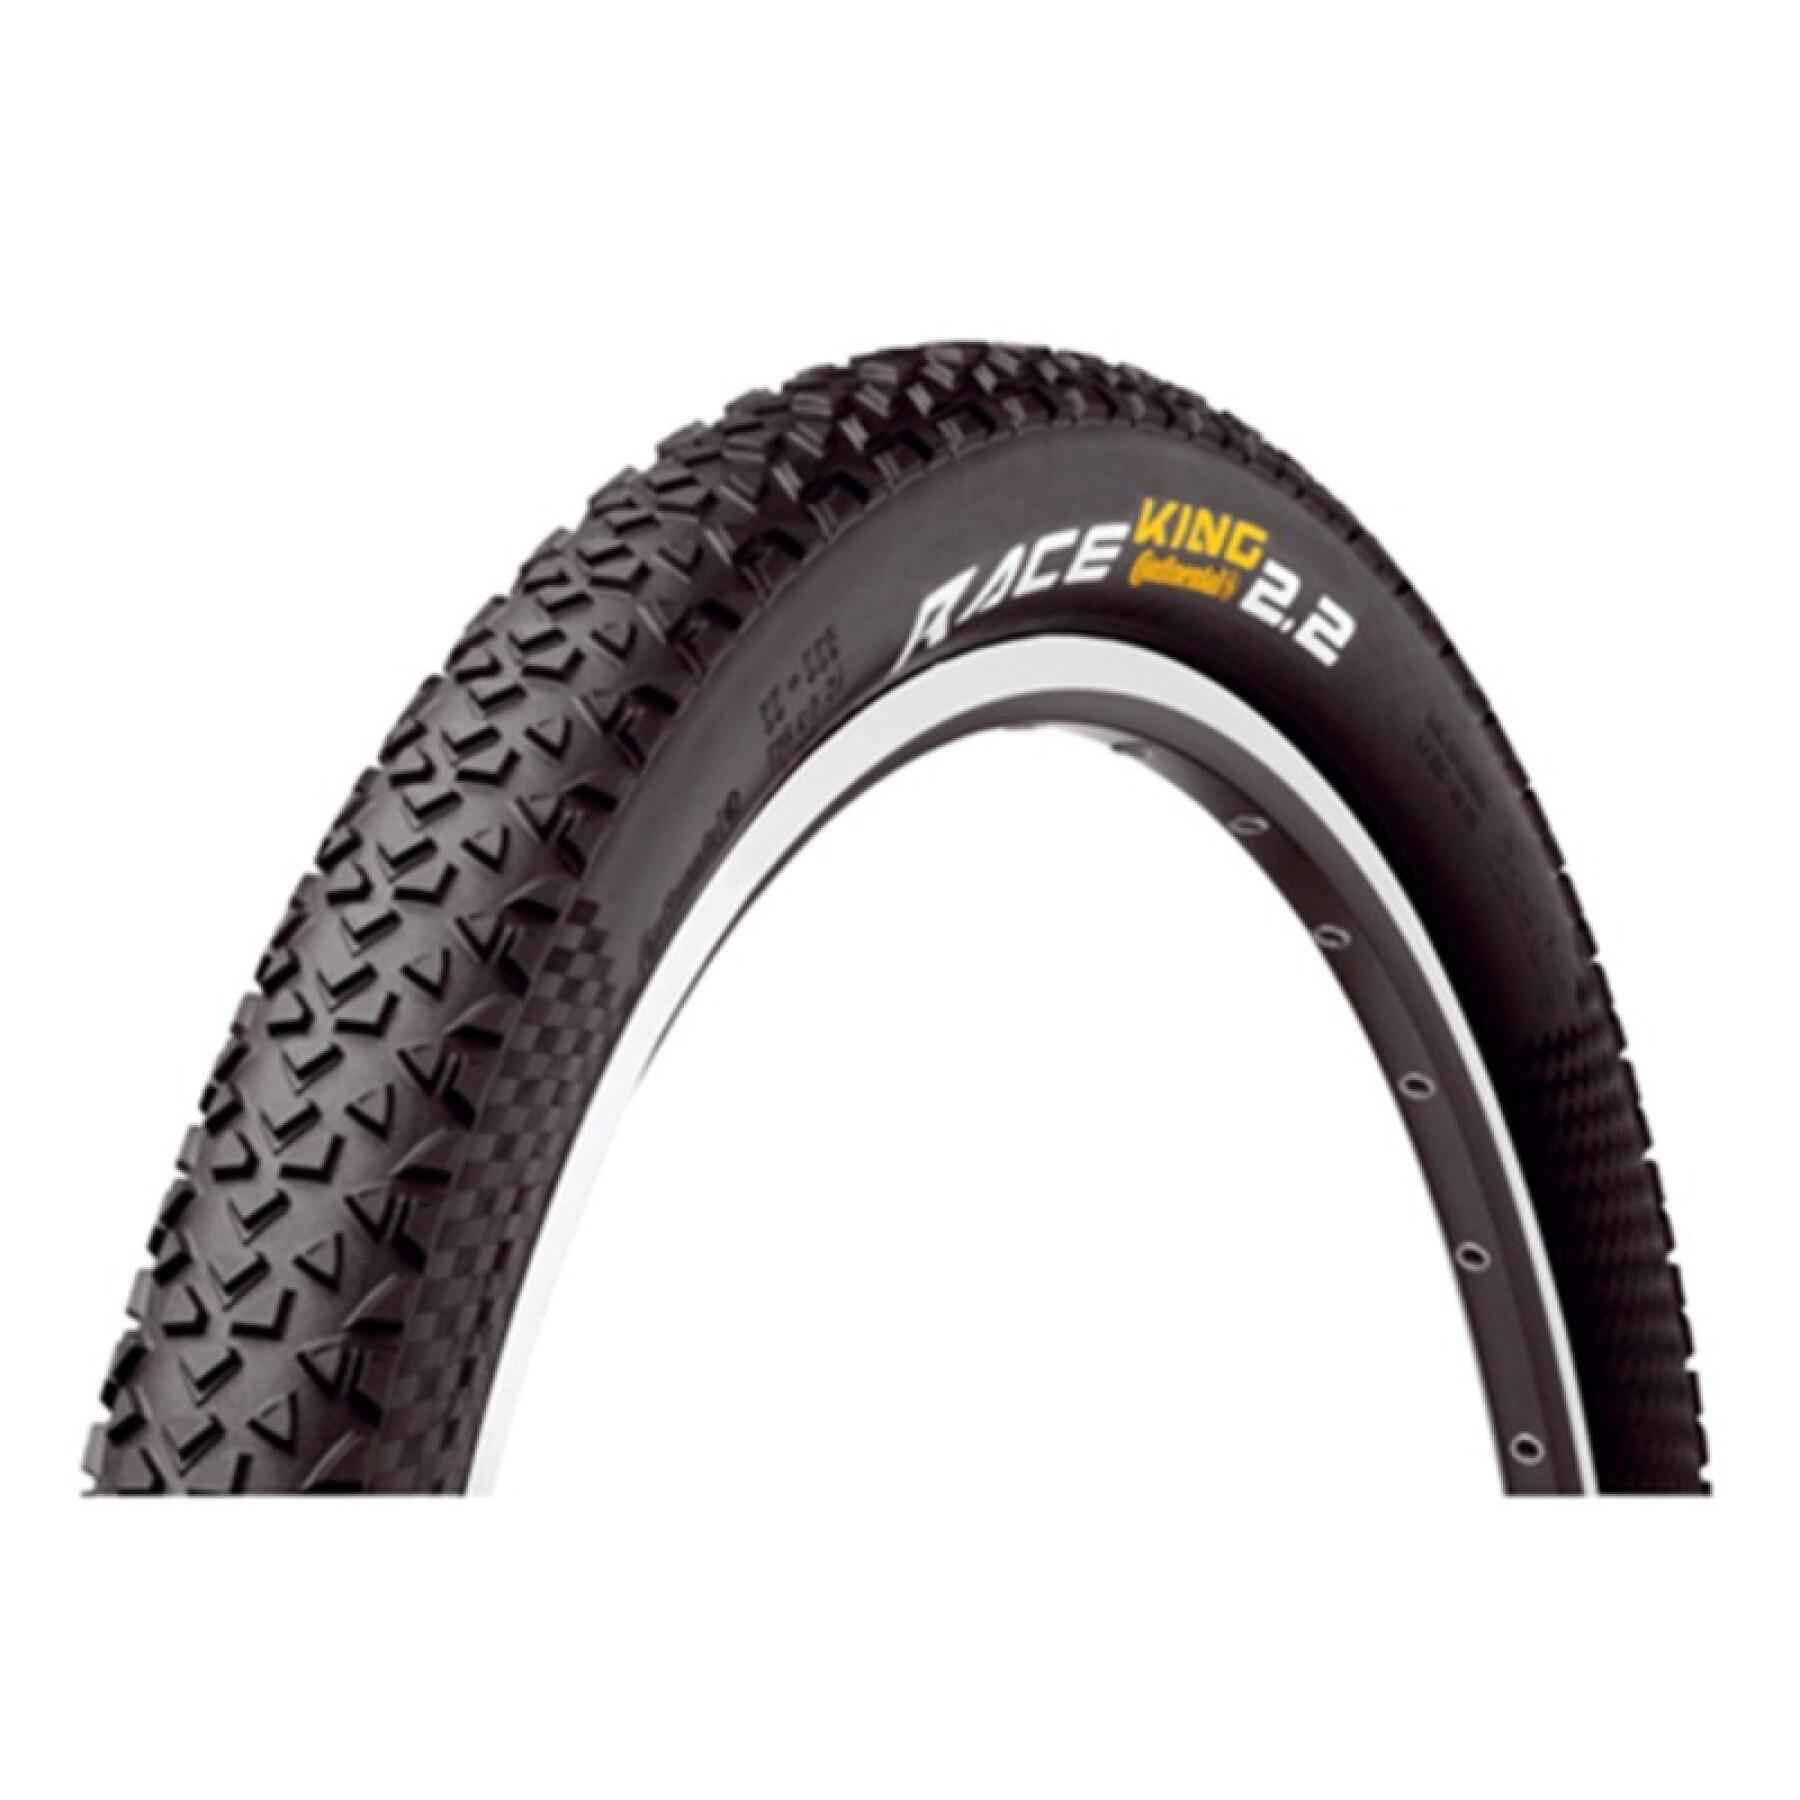 Protective tubeless bicycle tire Continental Race King